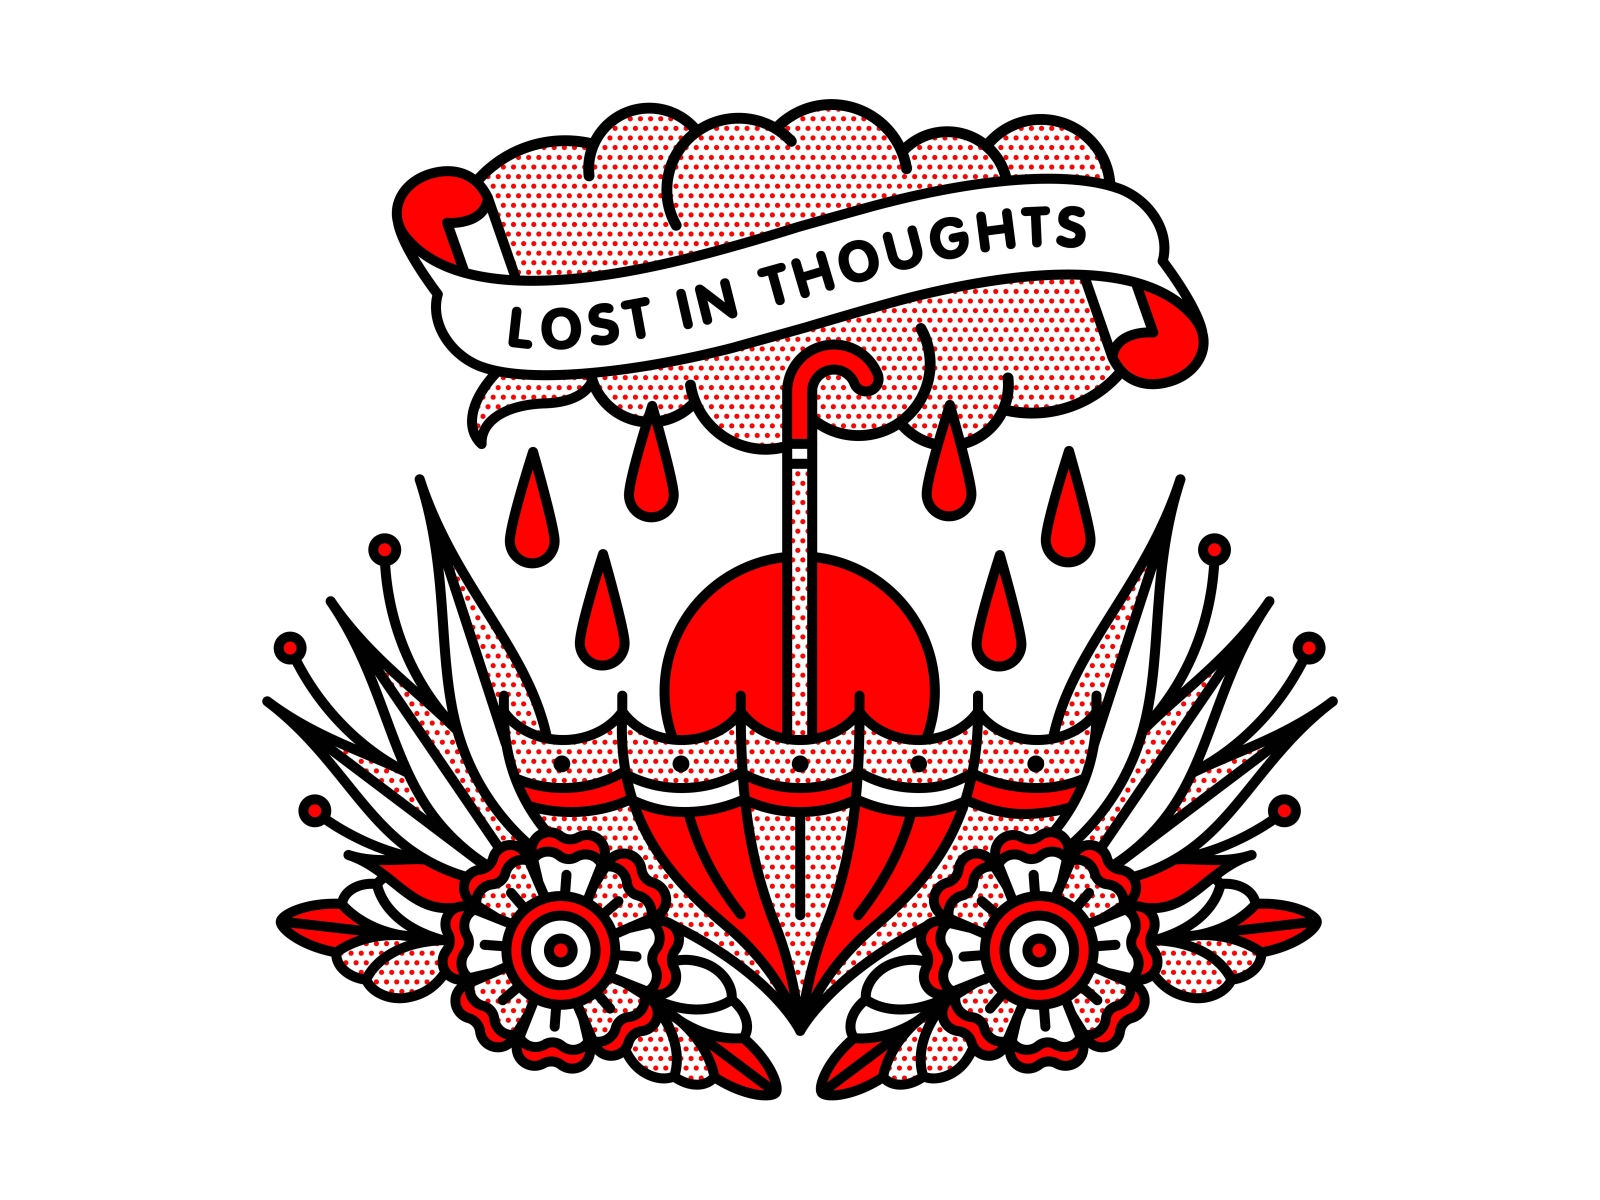 Lost In Thoughts cloud halftone illustration lost monoline parasol rain storm tattoo thought umbrella